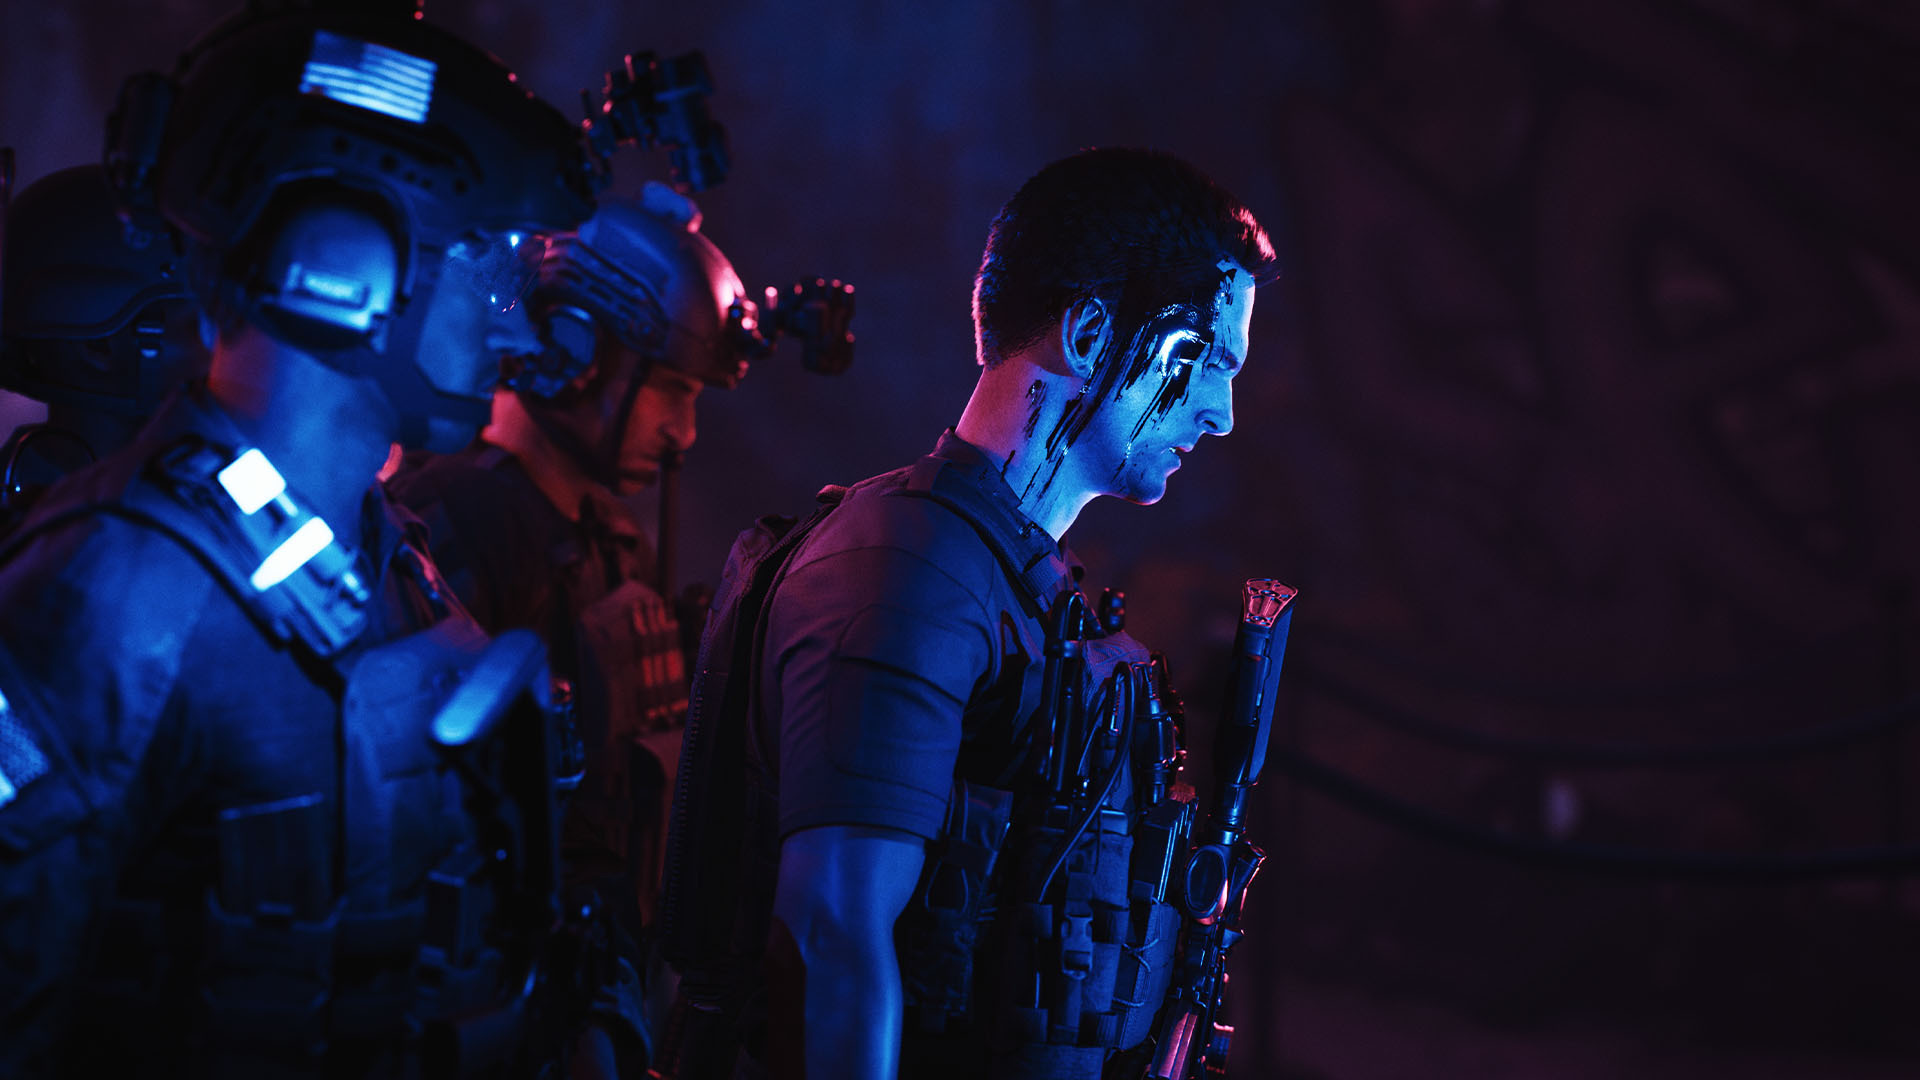 How Ready Or Not creates an authentic tactical shooter experience